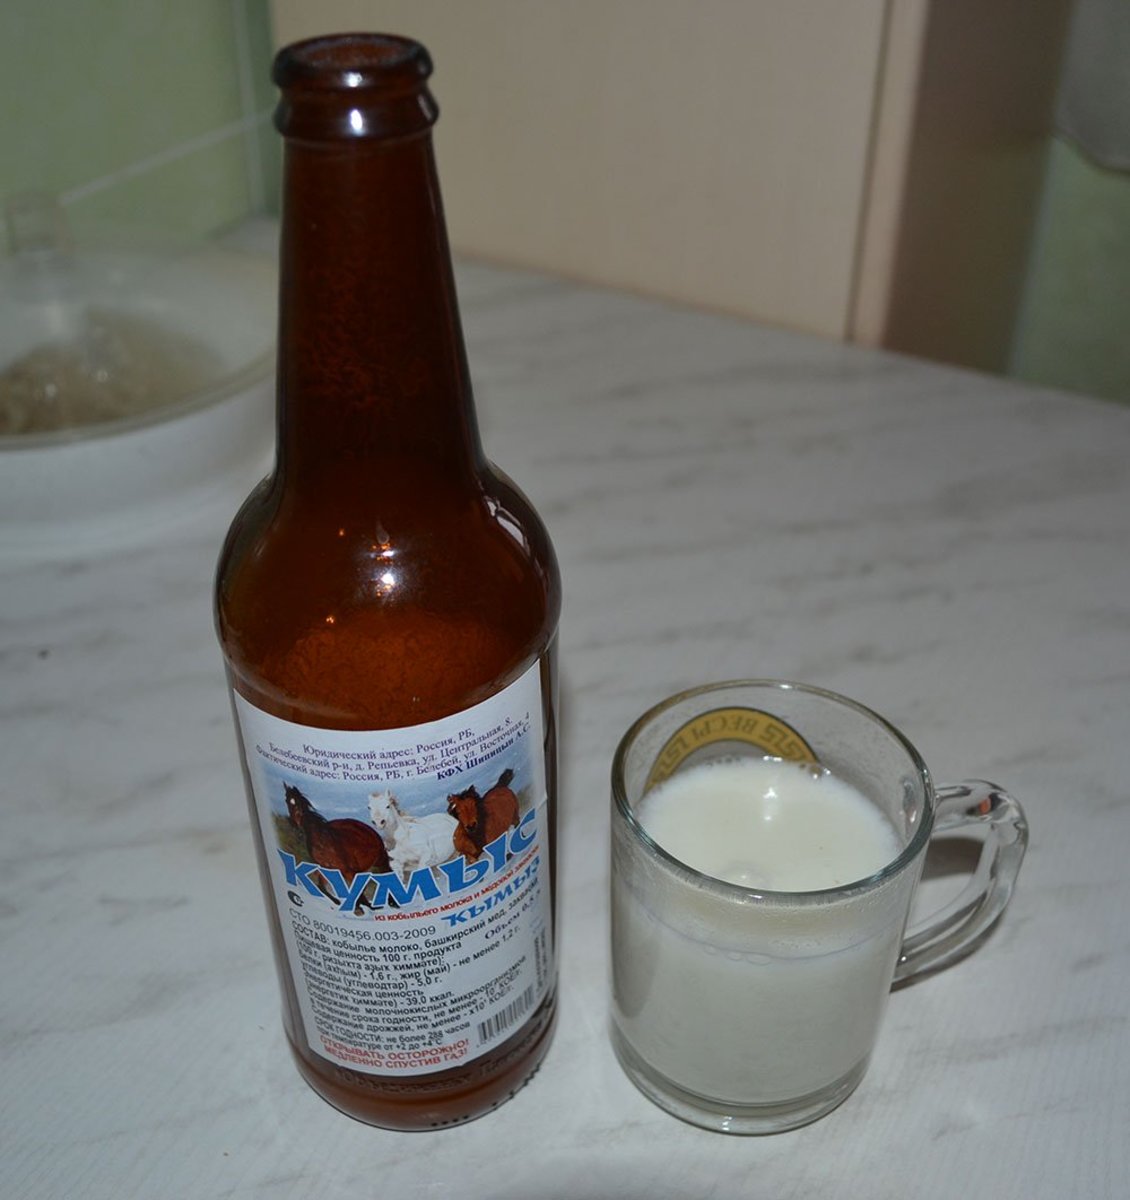 Here is a fresh bottle of kumis—fermented horse's milk. I just drank this before lunch!